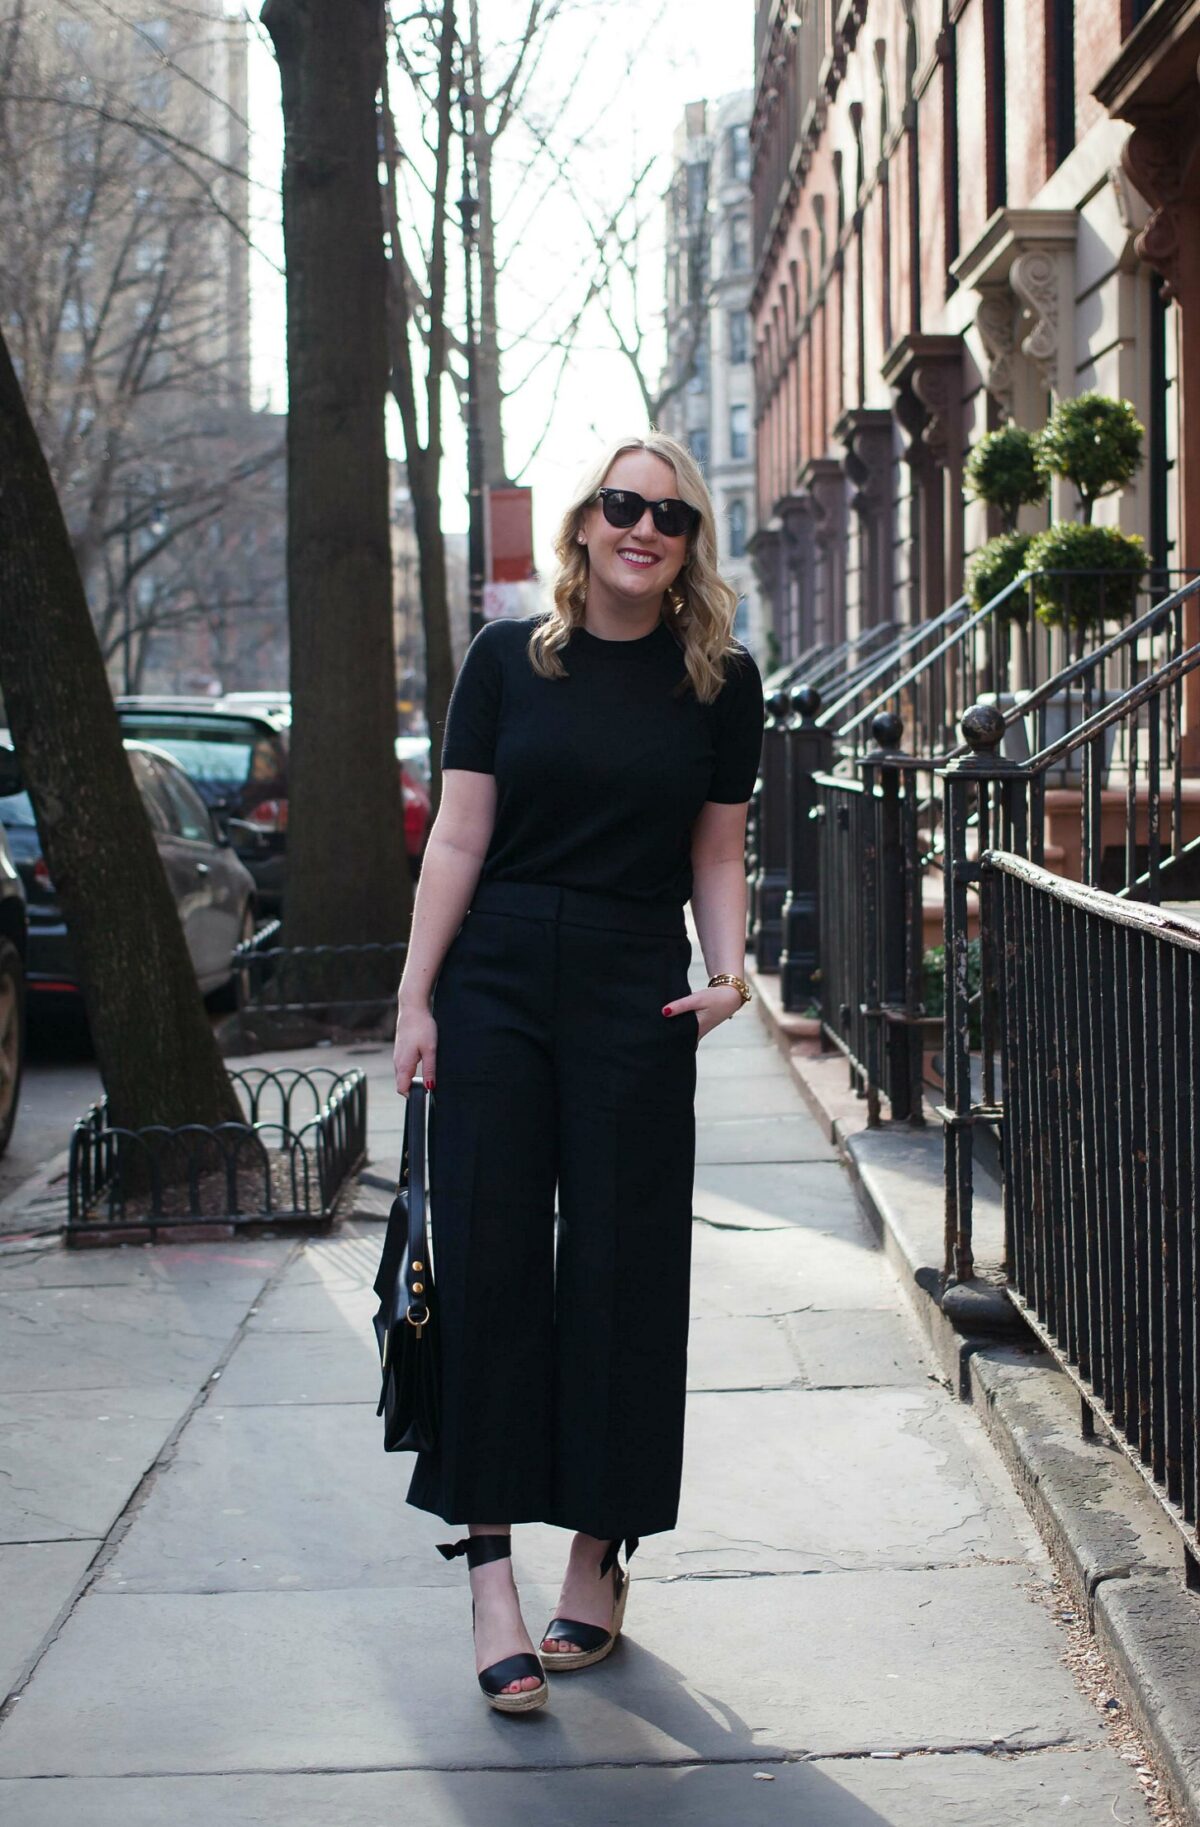 The Statement Pant I wit & whimsy